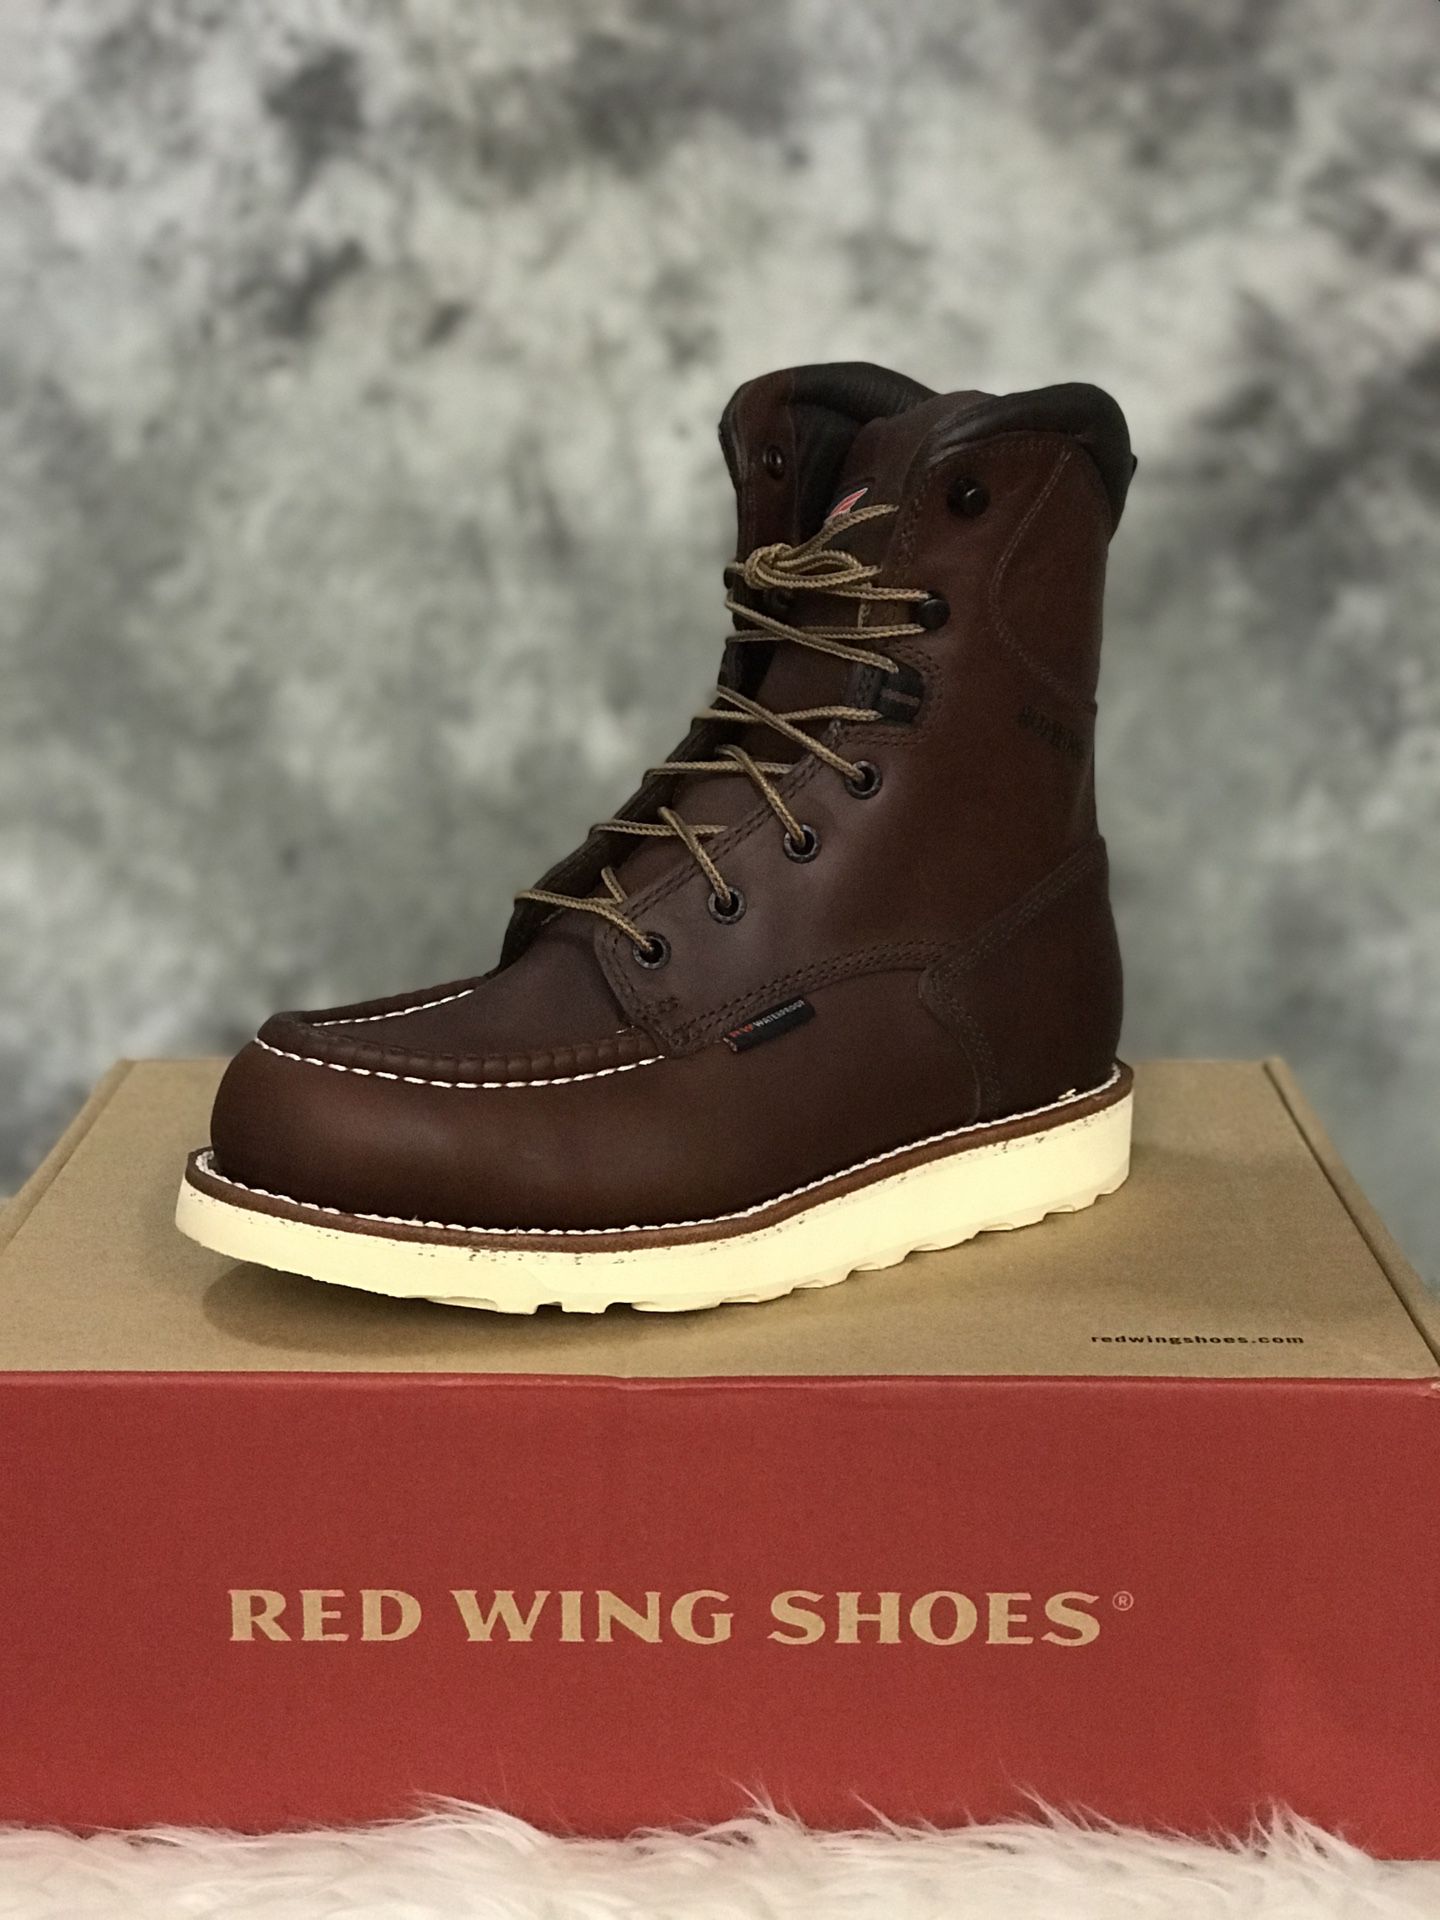 Red Wing Shoes, Boots, Botas, Working Boots, Water Proof